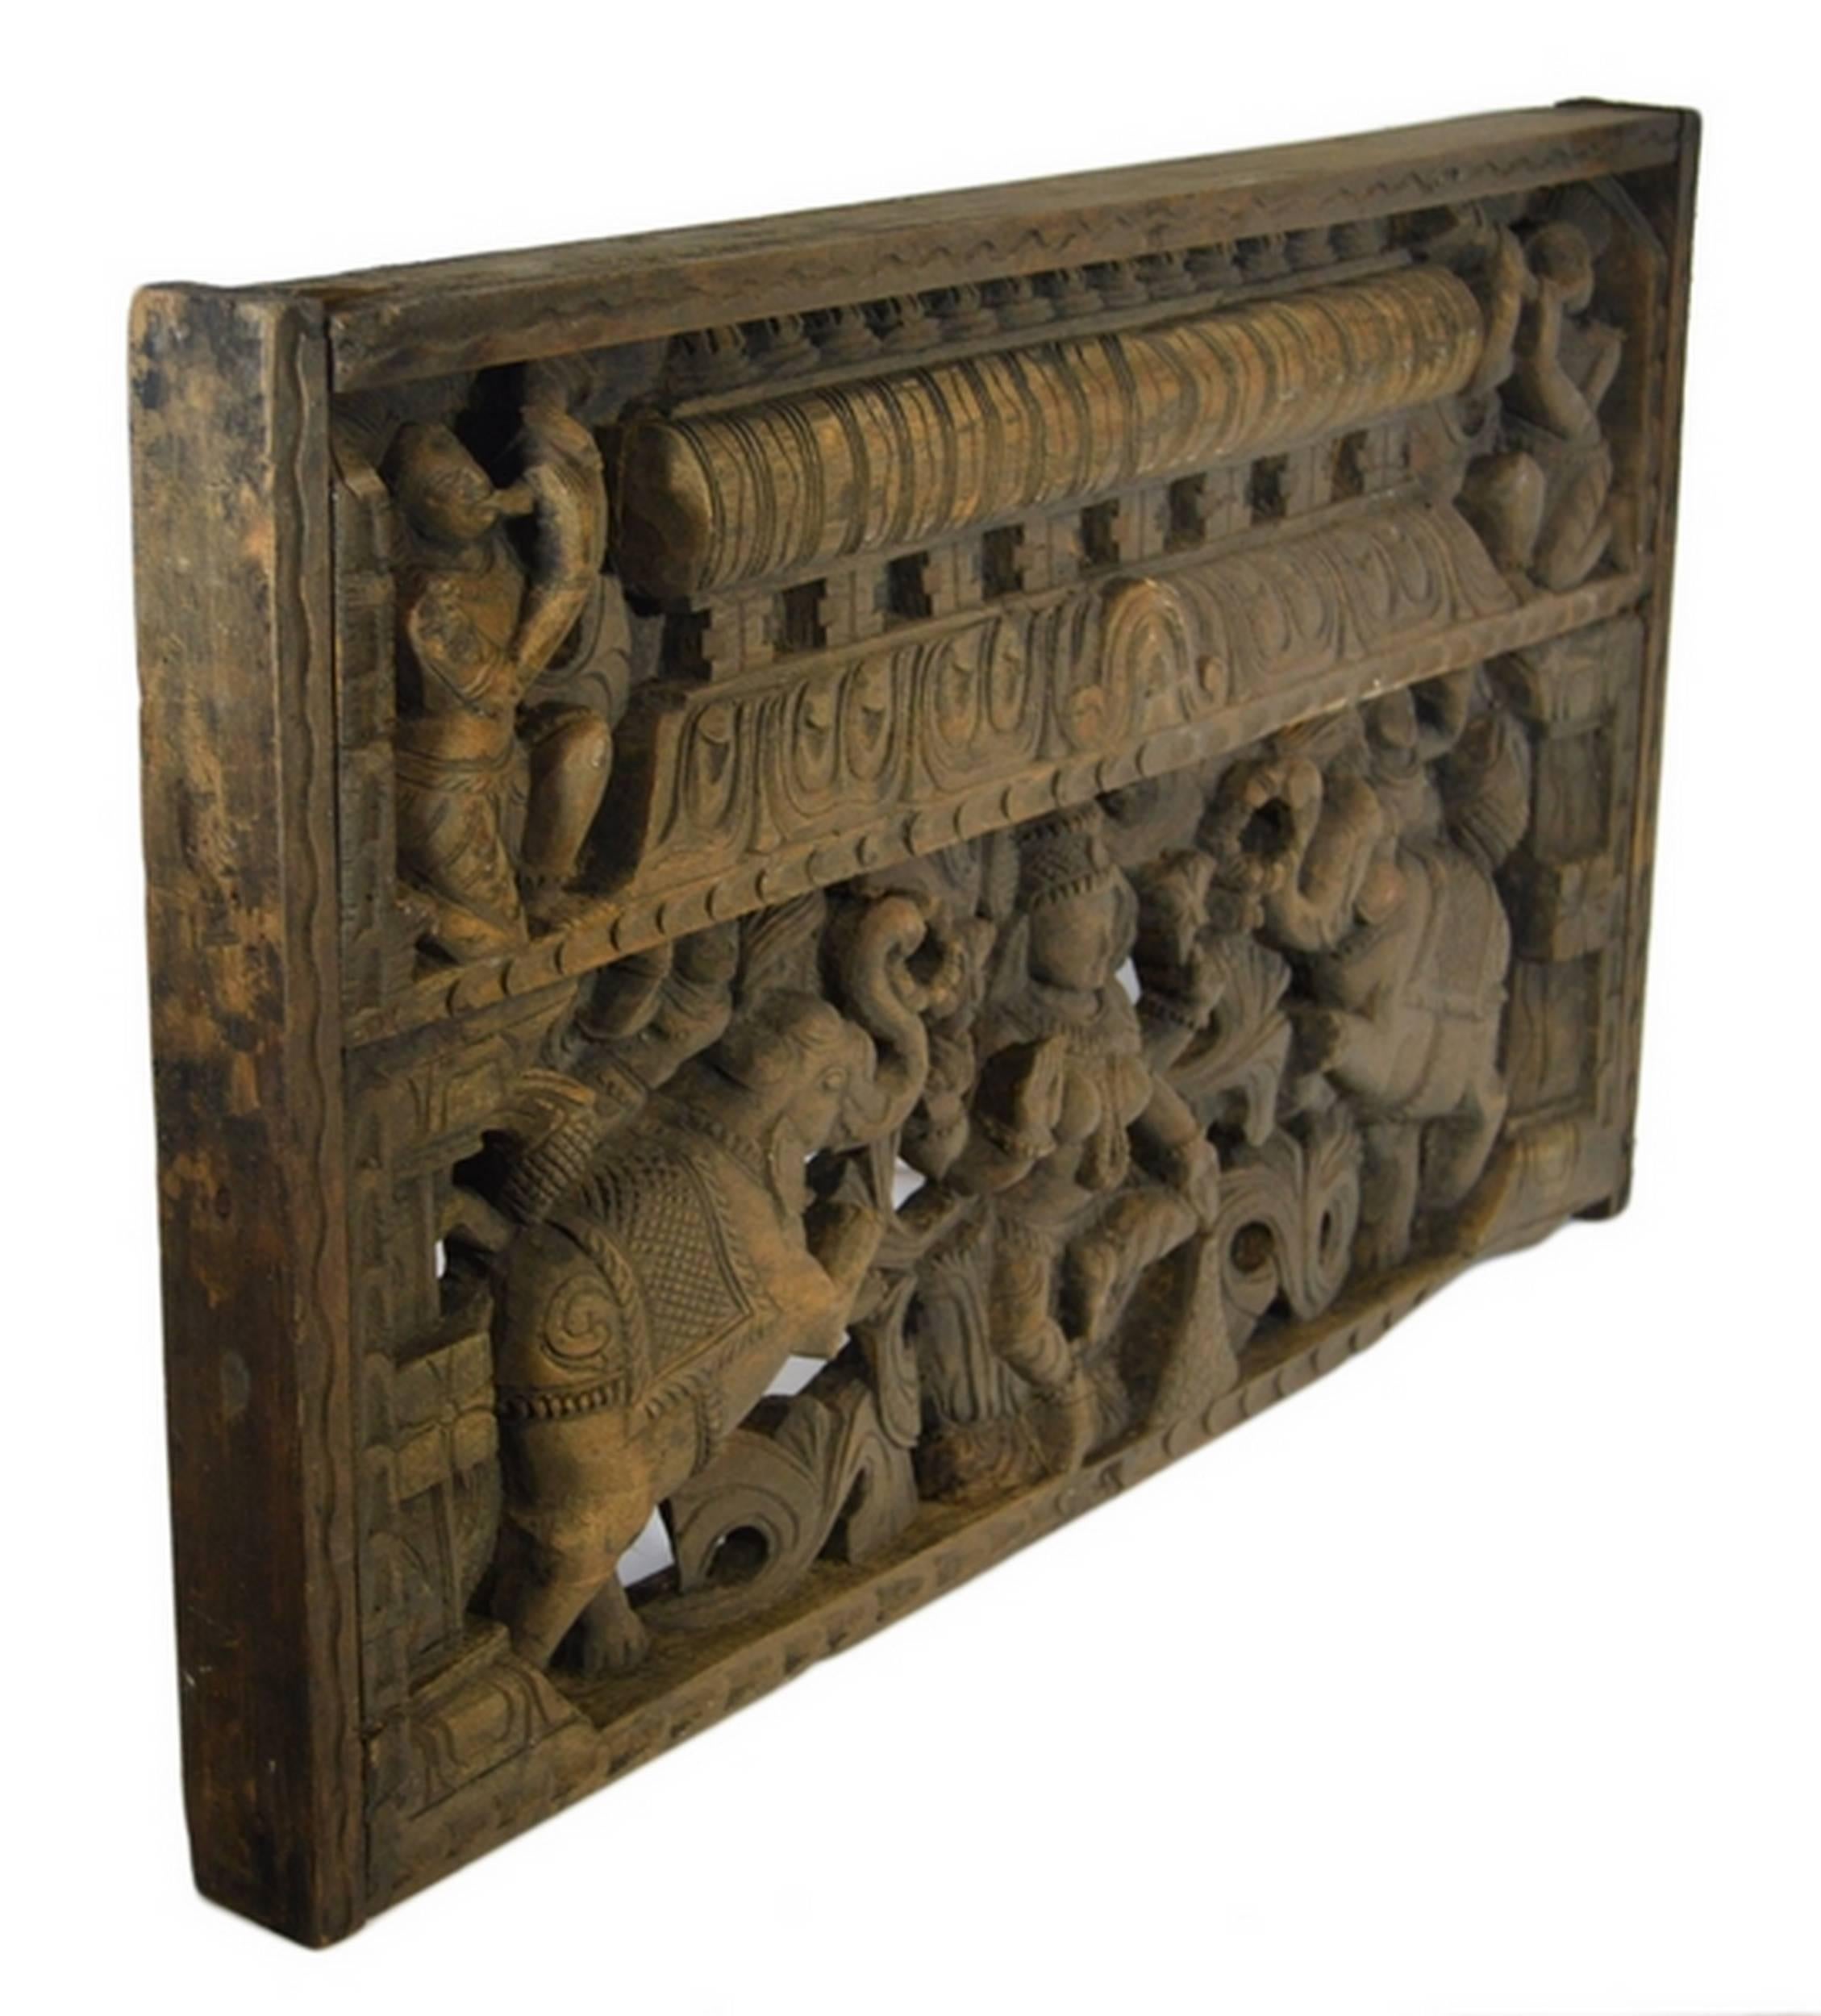 An early 20th century religious temple plaque hand-carved of Sheesham wood in India. This small rectangular plaque displays two sections with several characters. The bottom section showcases a Hindu goddess, perhaps Shiva (third eye on its forehead,